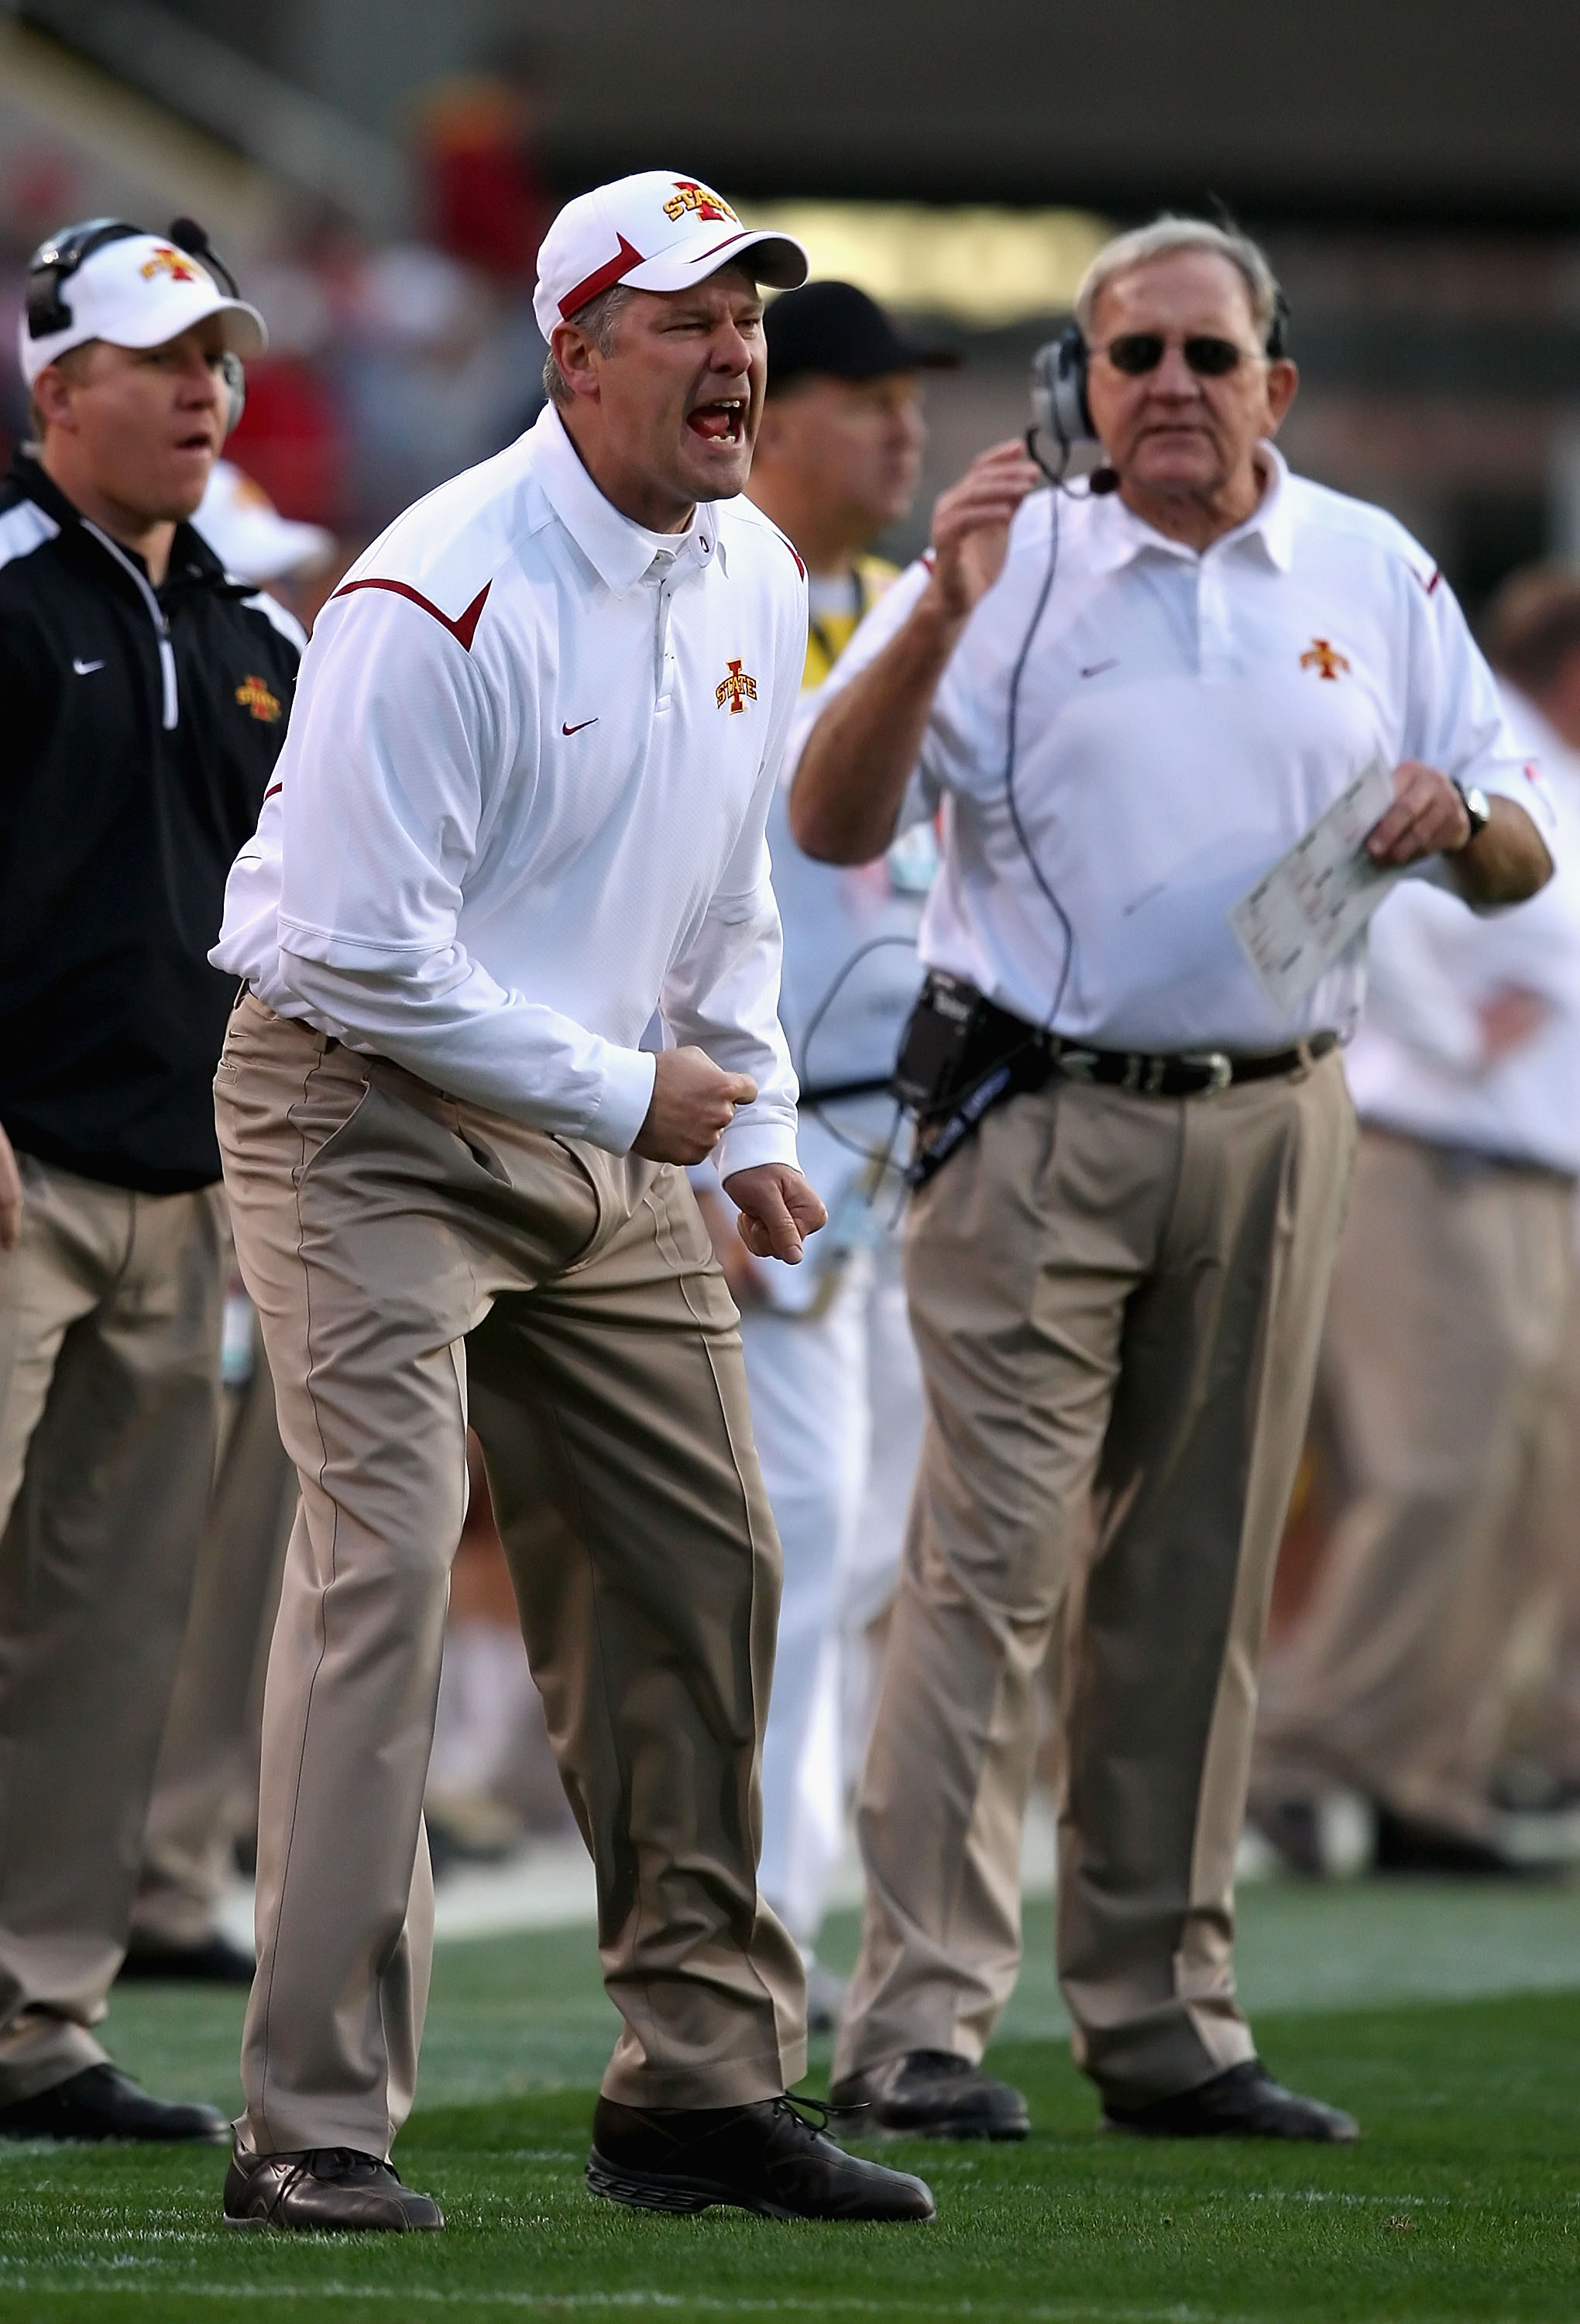 Tempe, AZ - DECEMBER 31:  Head coach Paul Rhoads of the Iowa State Cyclones reacts to a call during the Insight Bowl against the Minnesota Golden Gophers at Arizona Stadium on December 31, 2009 in Tempe, Arizona.  (Photo by Christian Petersen/Getty Images